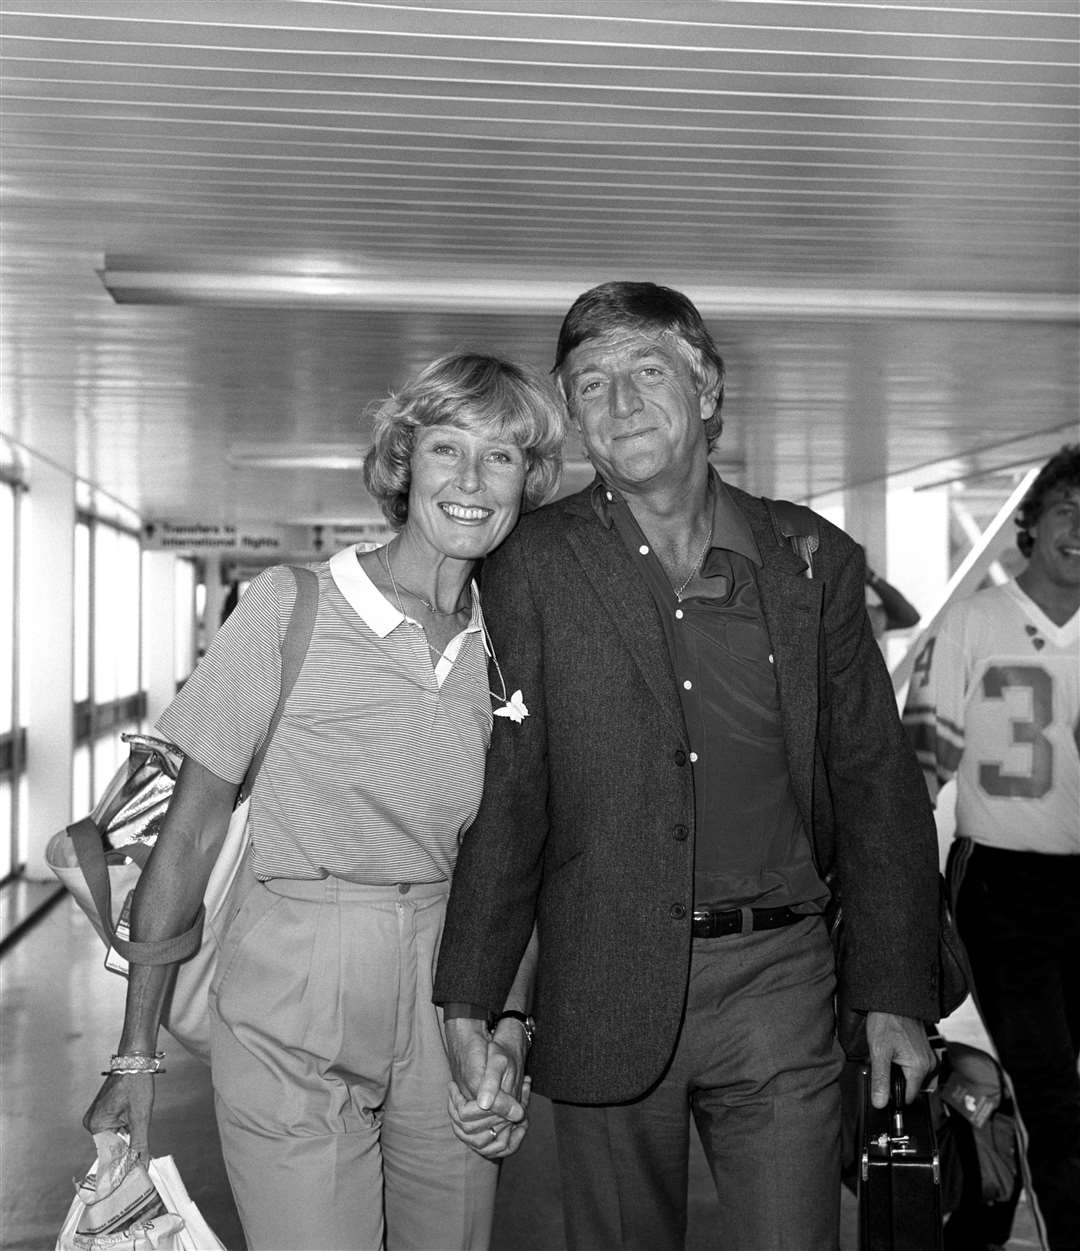 Sir Michael with his wife Mary at Heathrow Airport (PA)